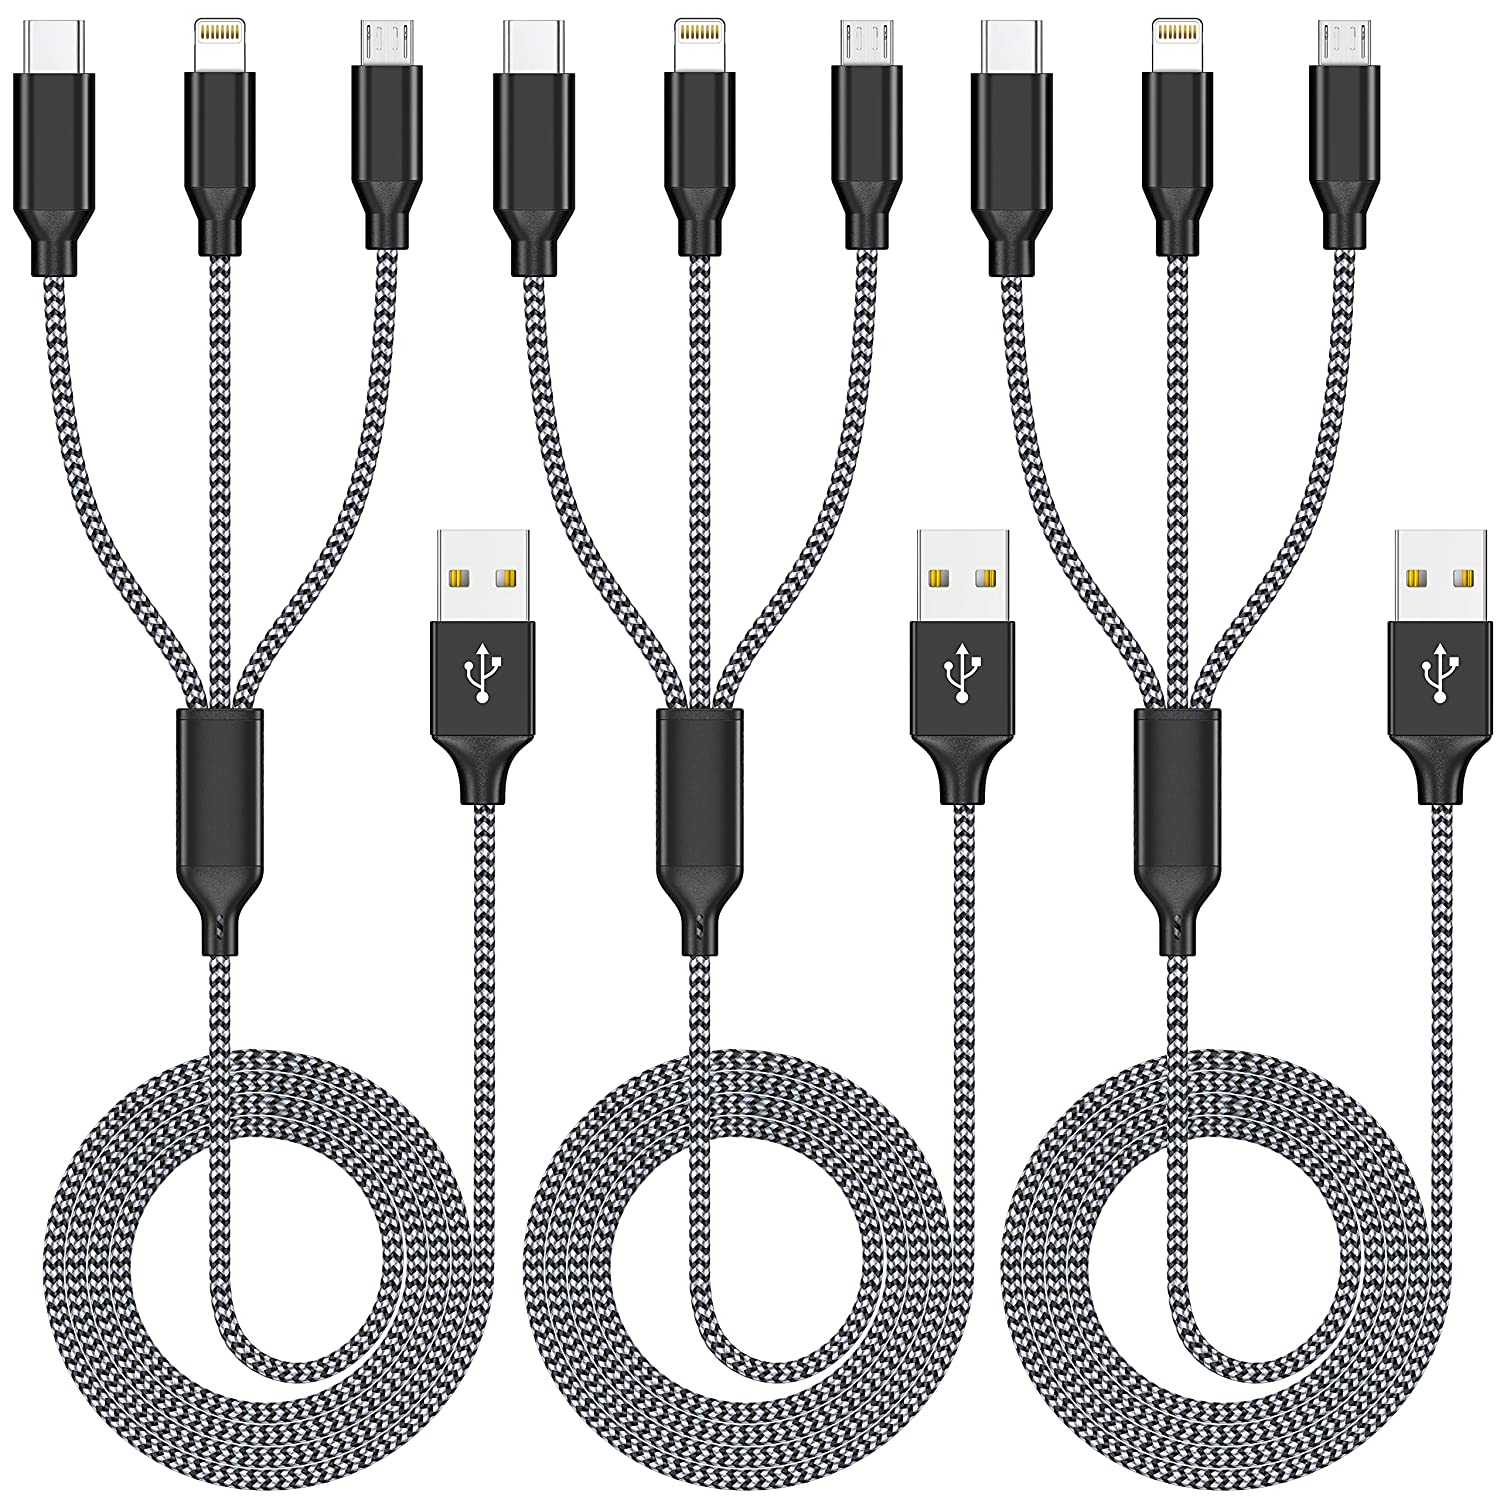 3-Pack 4' 3-in-1 USB Charging Cable (Grey/Black or Pink) $3.75 + Free Shipping w/ Prime or on $25+